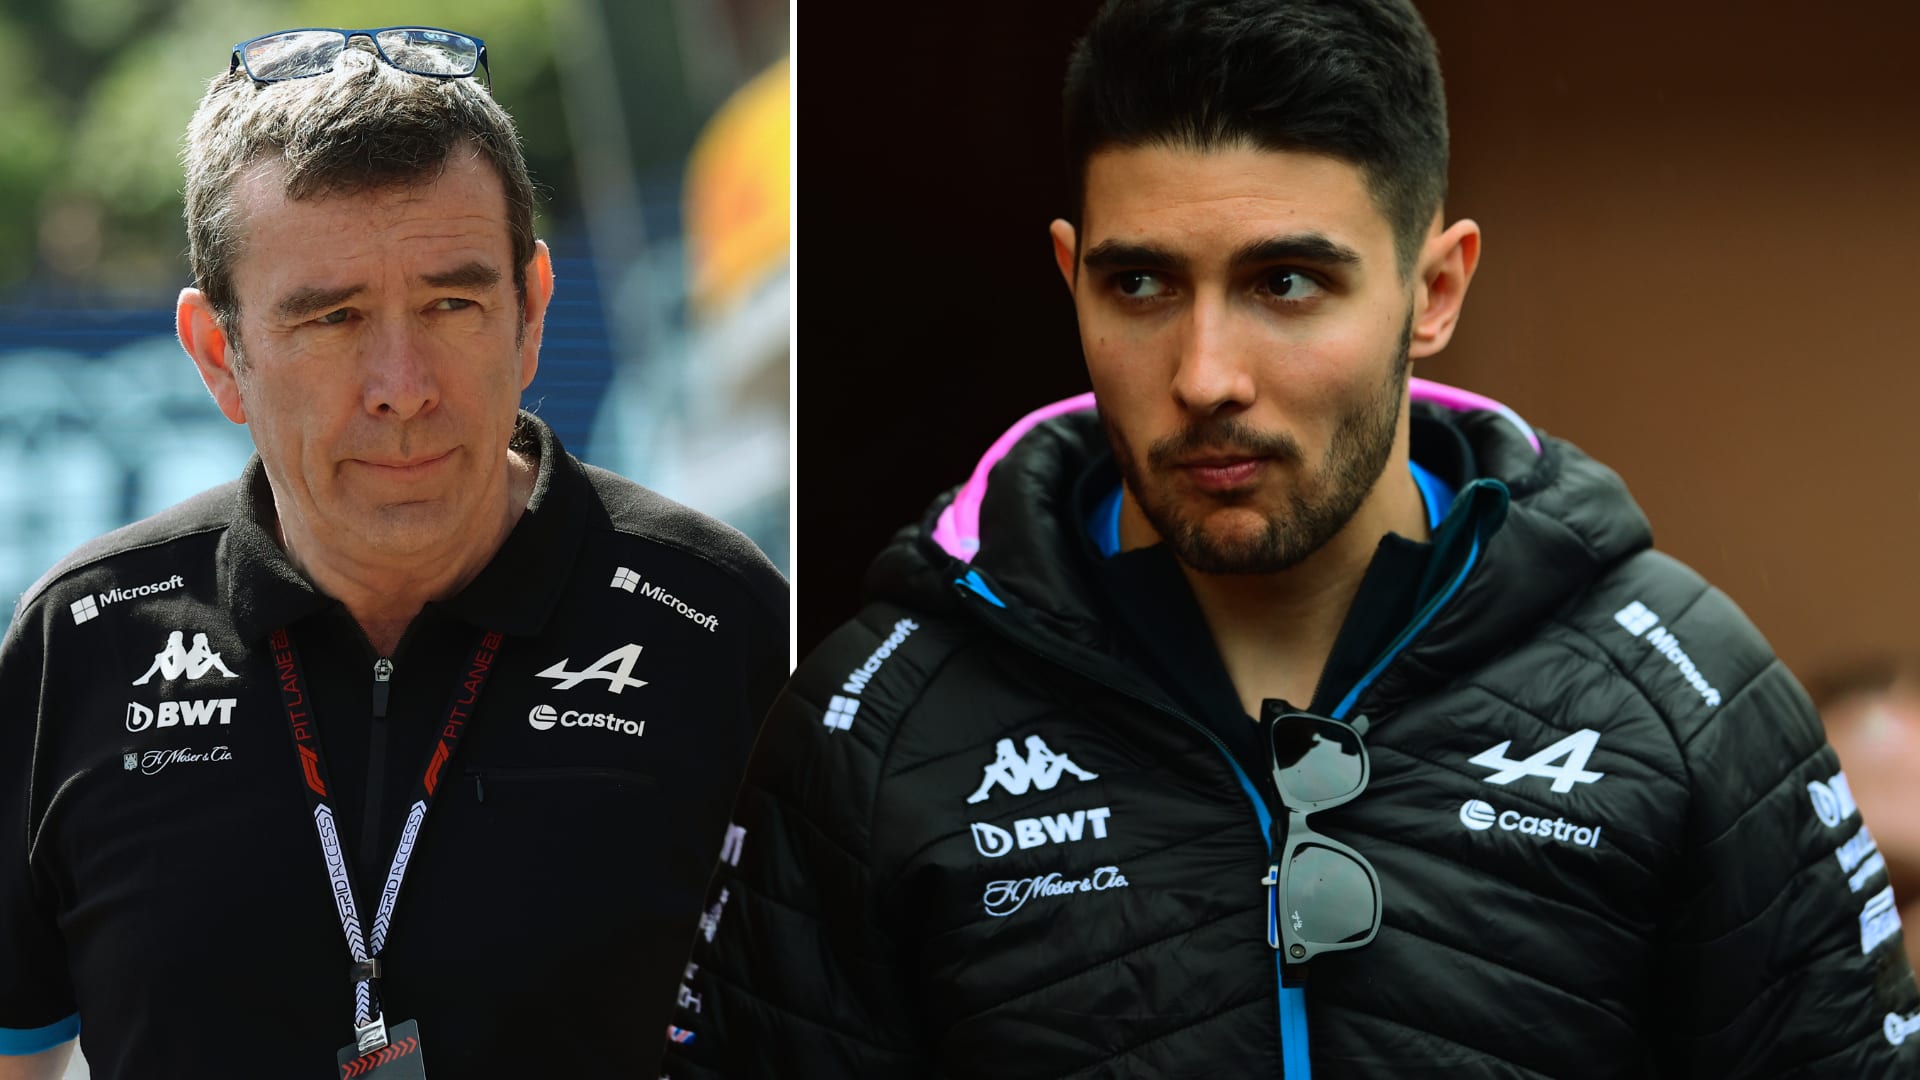 EXPLAINED: Could Alpine really bench Ocon for the Canadian Grand Prix?